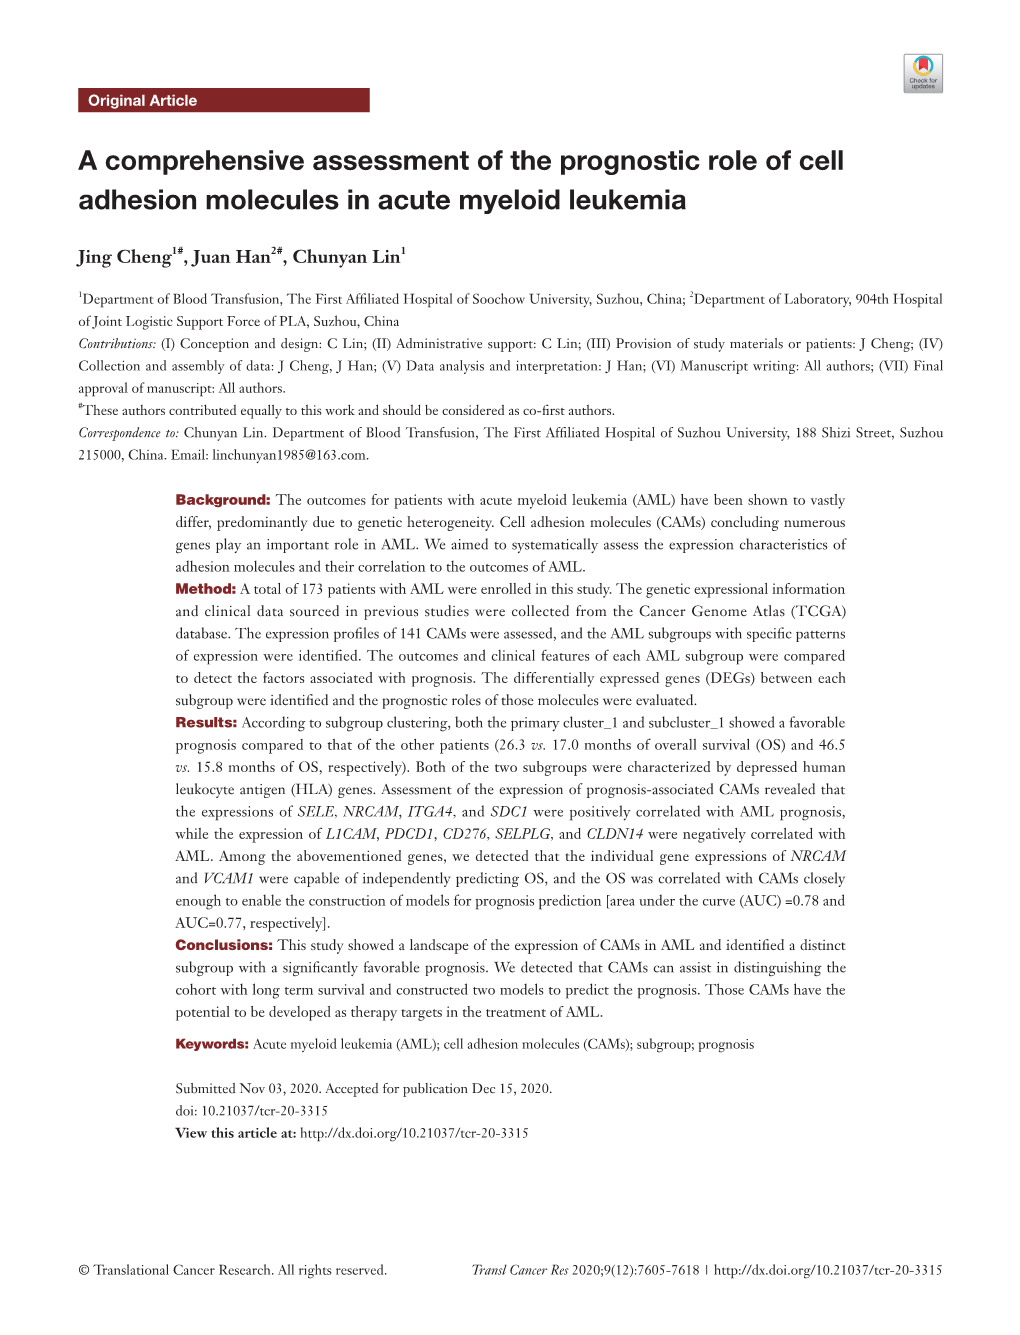 A Comprehensive Assessment of the Prognostic Role of Cell Adhesion Molecules in Acute Myeloid Leukemia